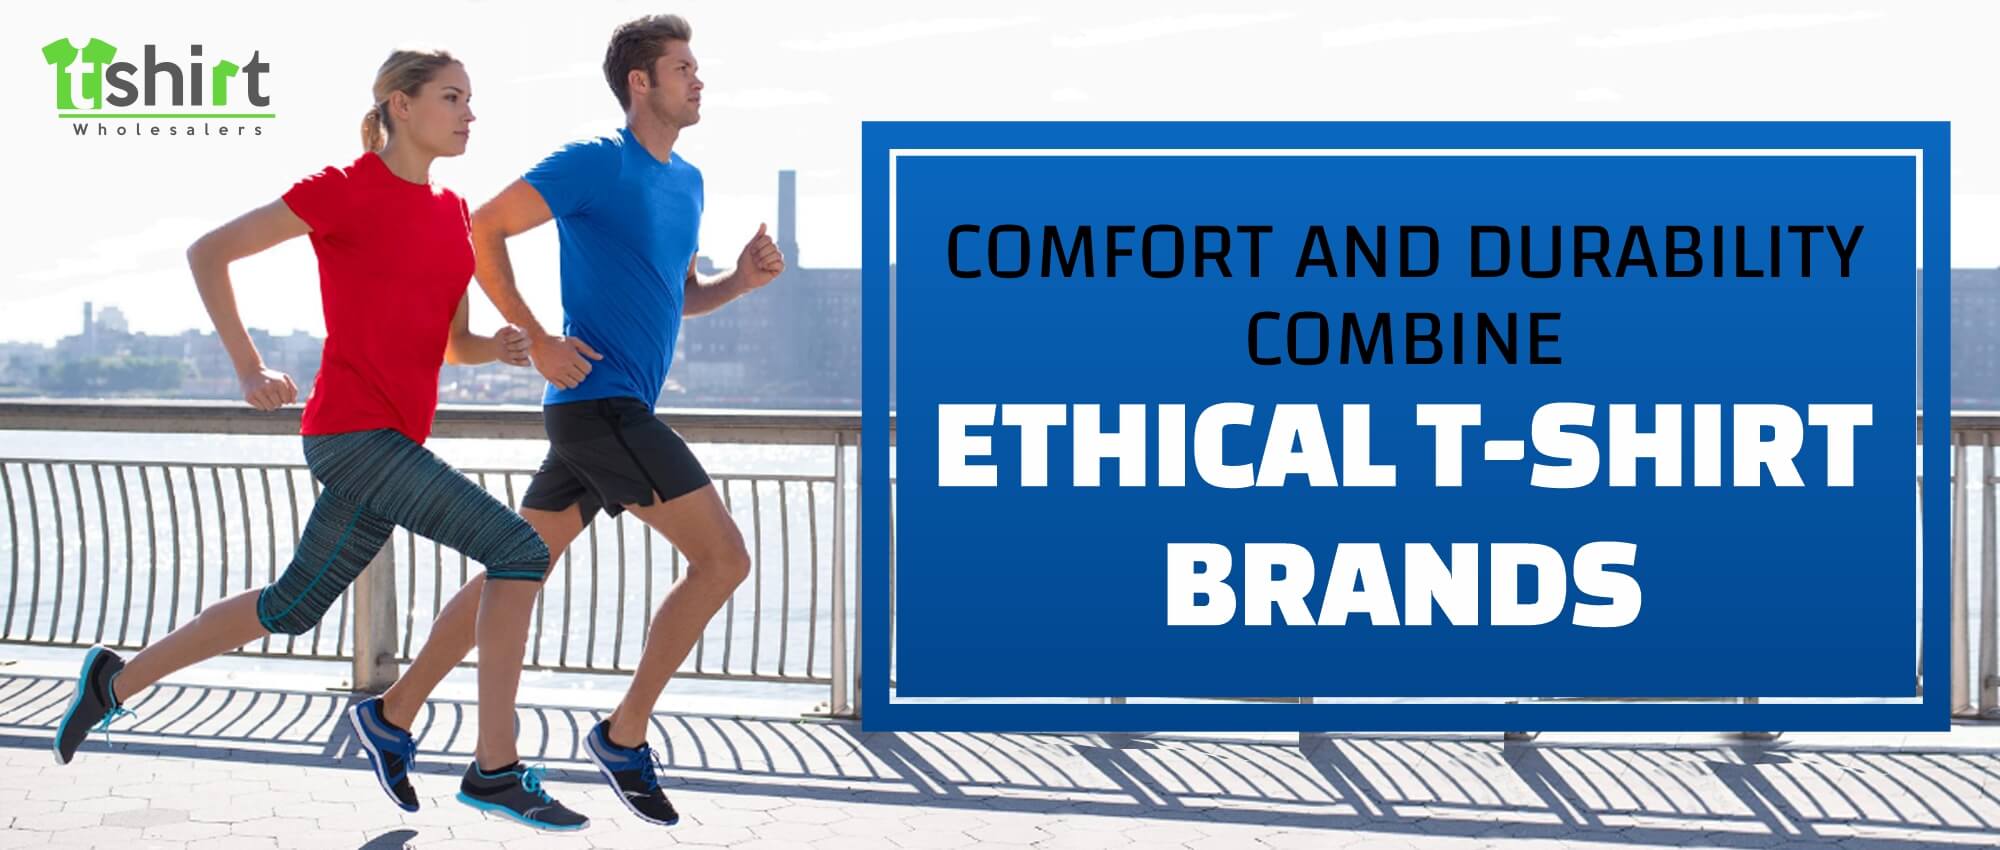 COMFORT AND DURABILITY COMBINE ETHICAL T-SHIRT BRANDS